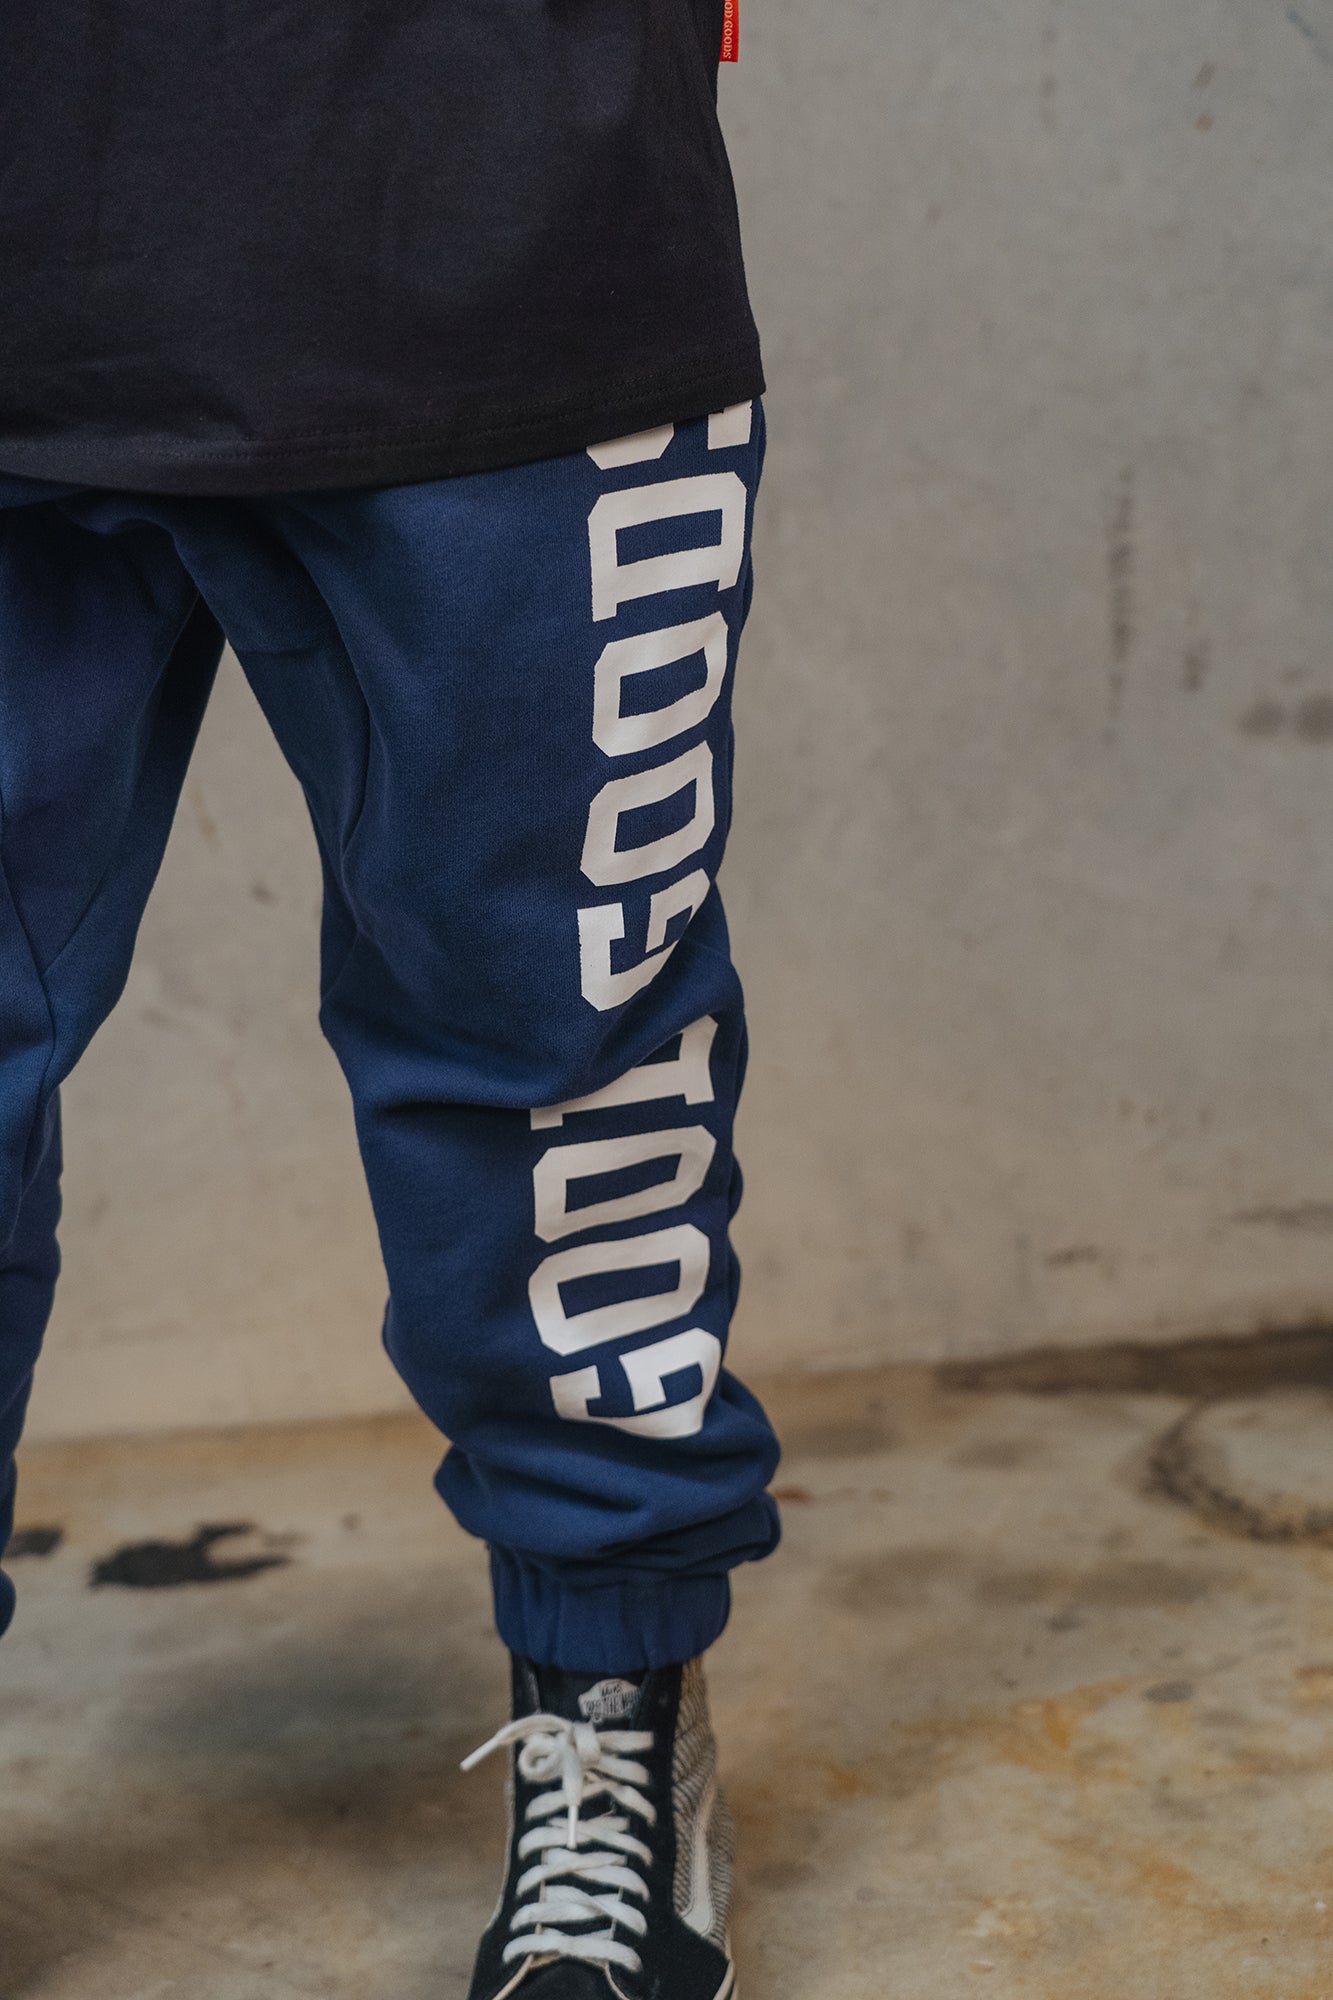 GOOD GOODS // Andy Trackpants LIGHT NAVY